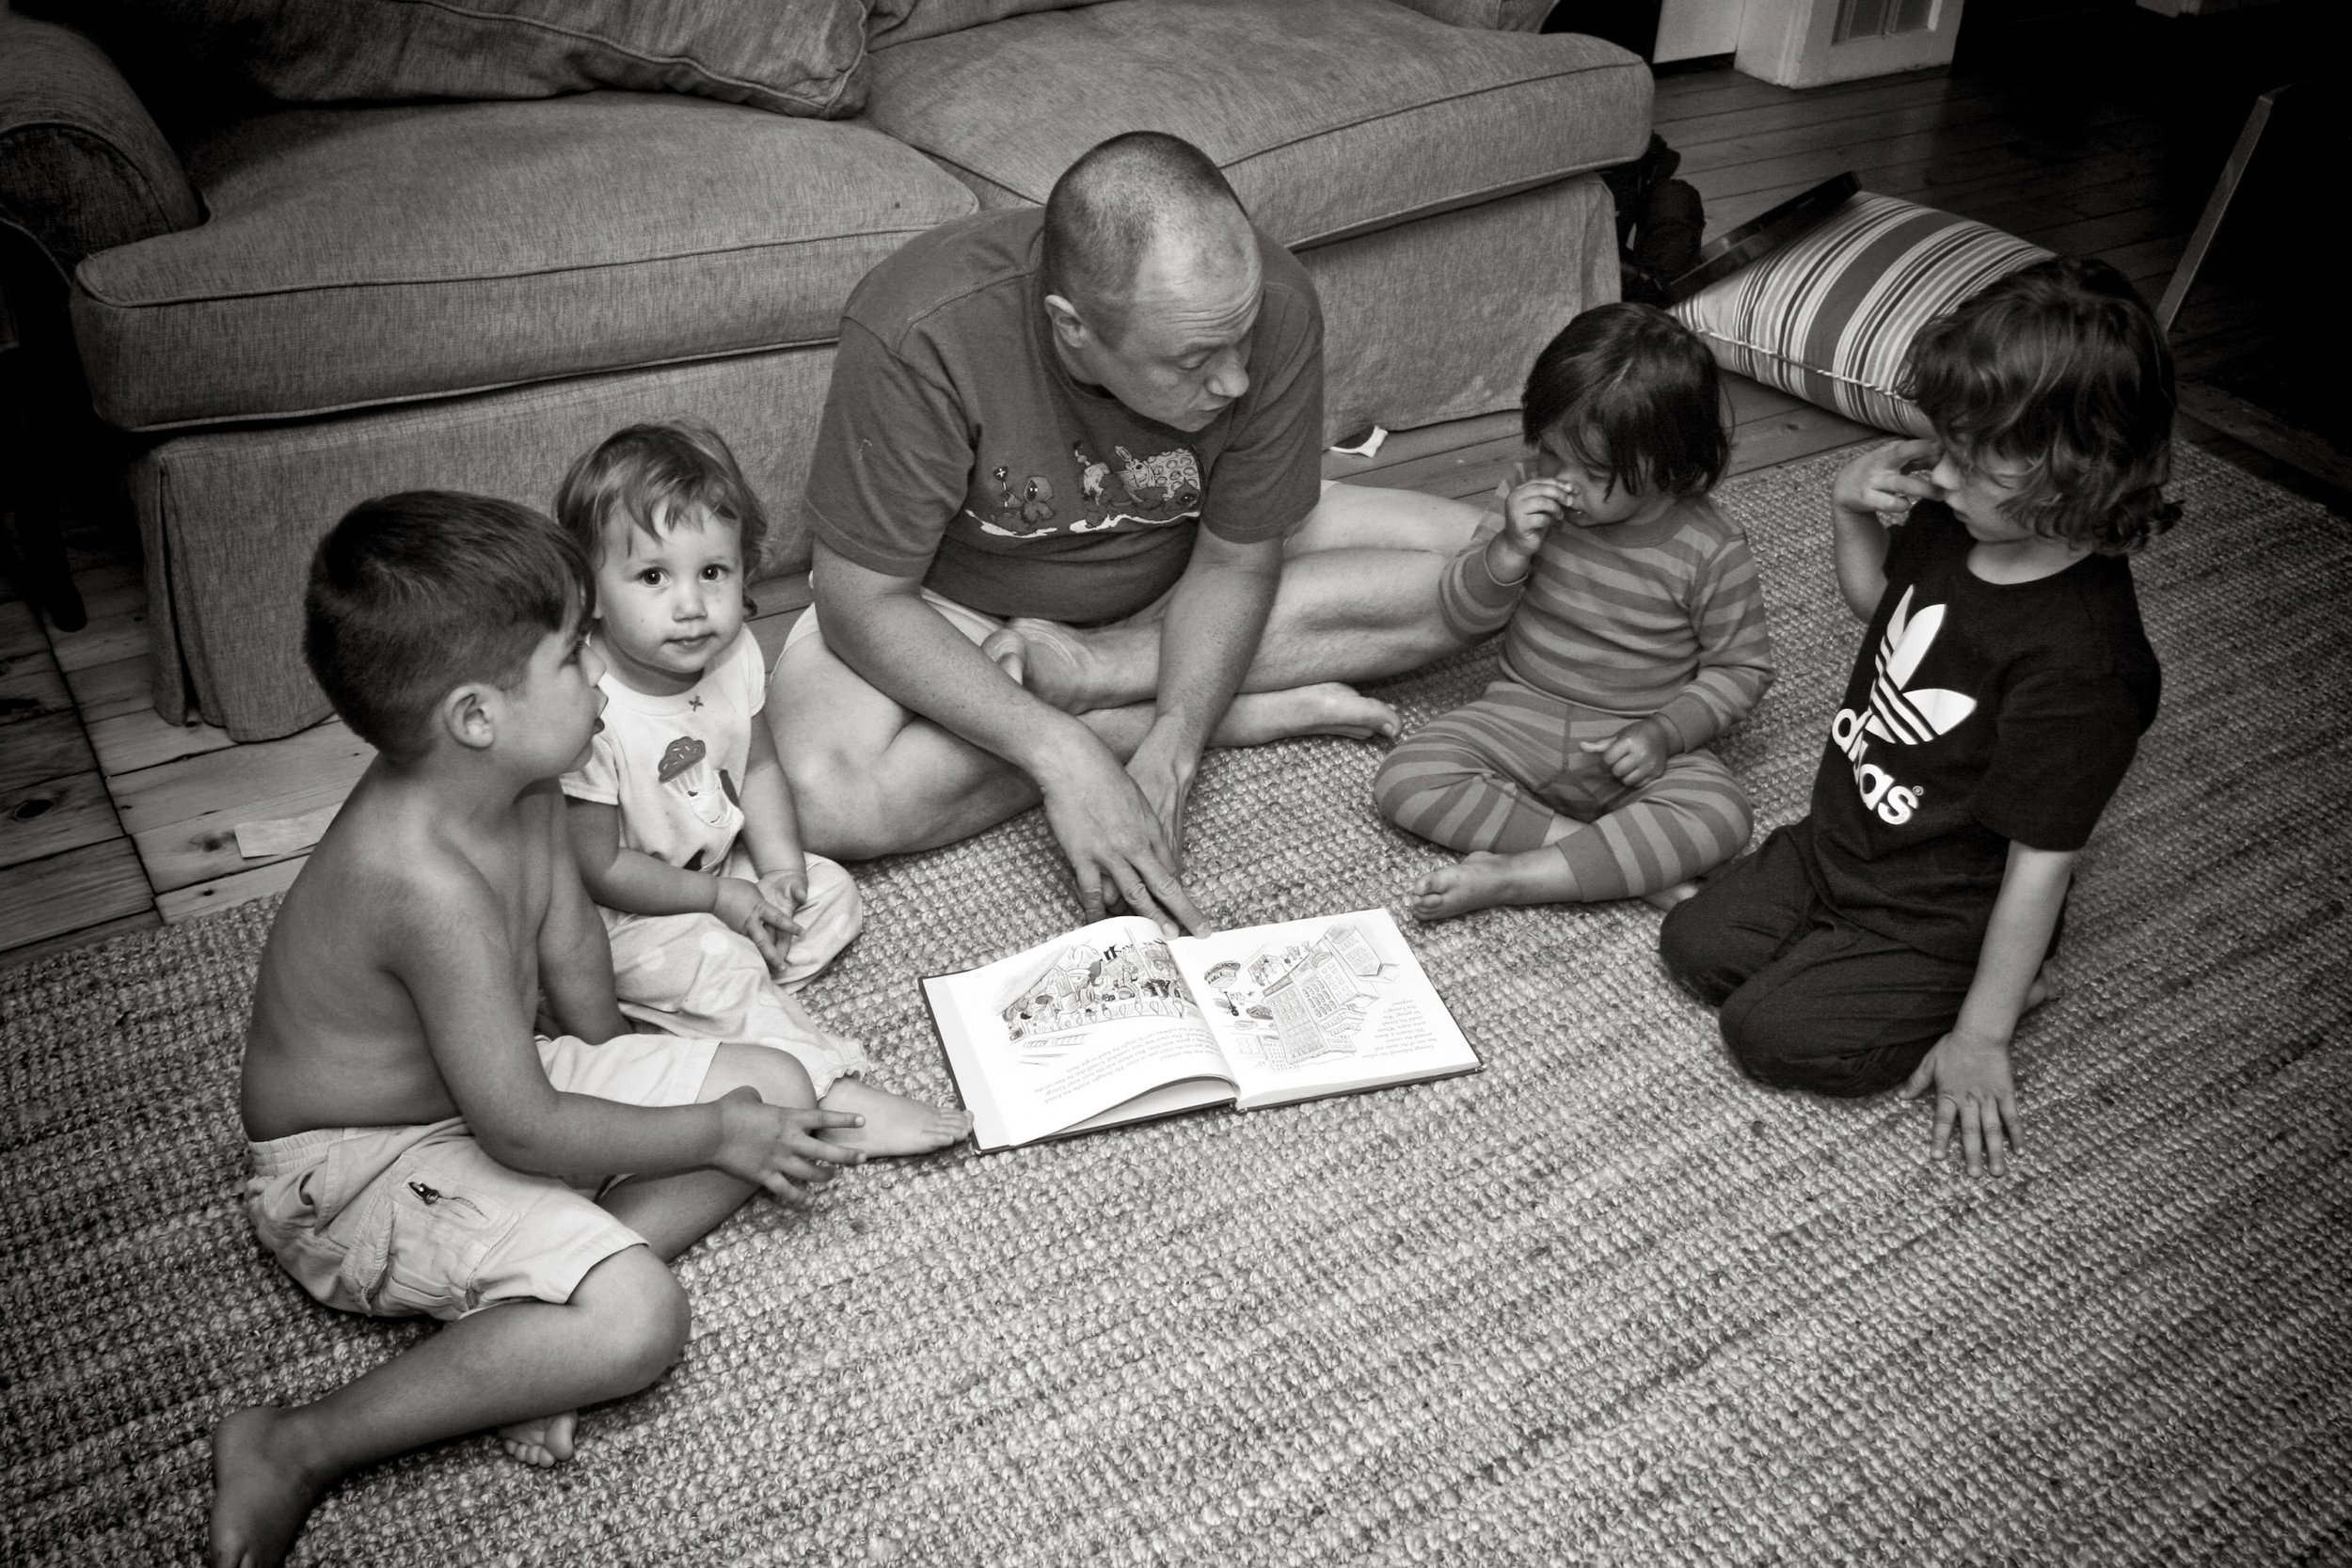 The oldest grandchild (Michael) reads to the youngest.